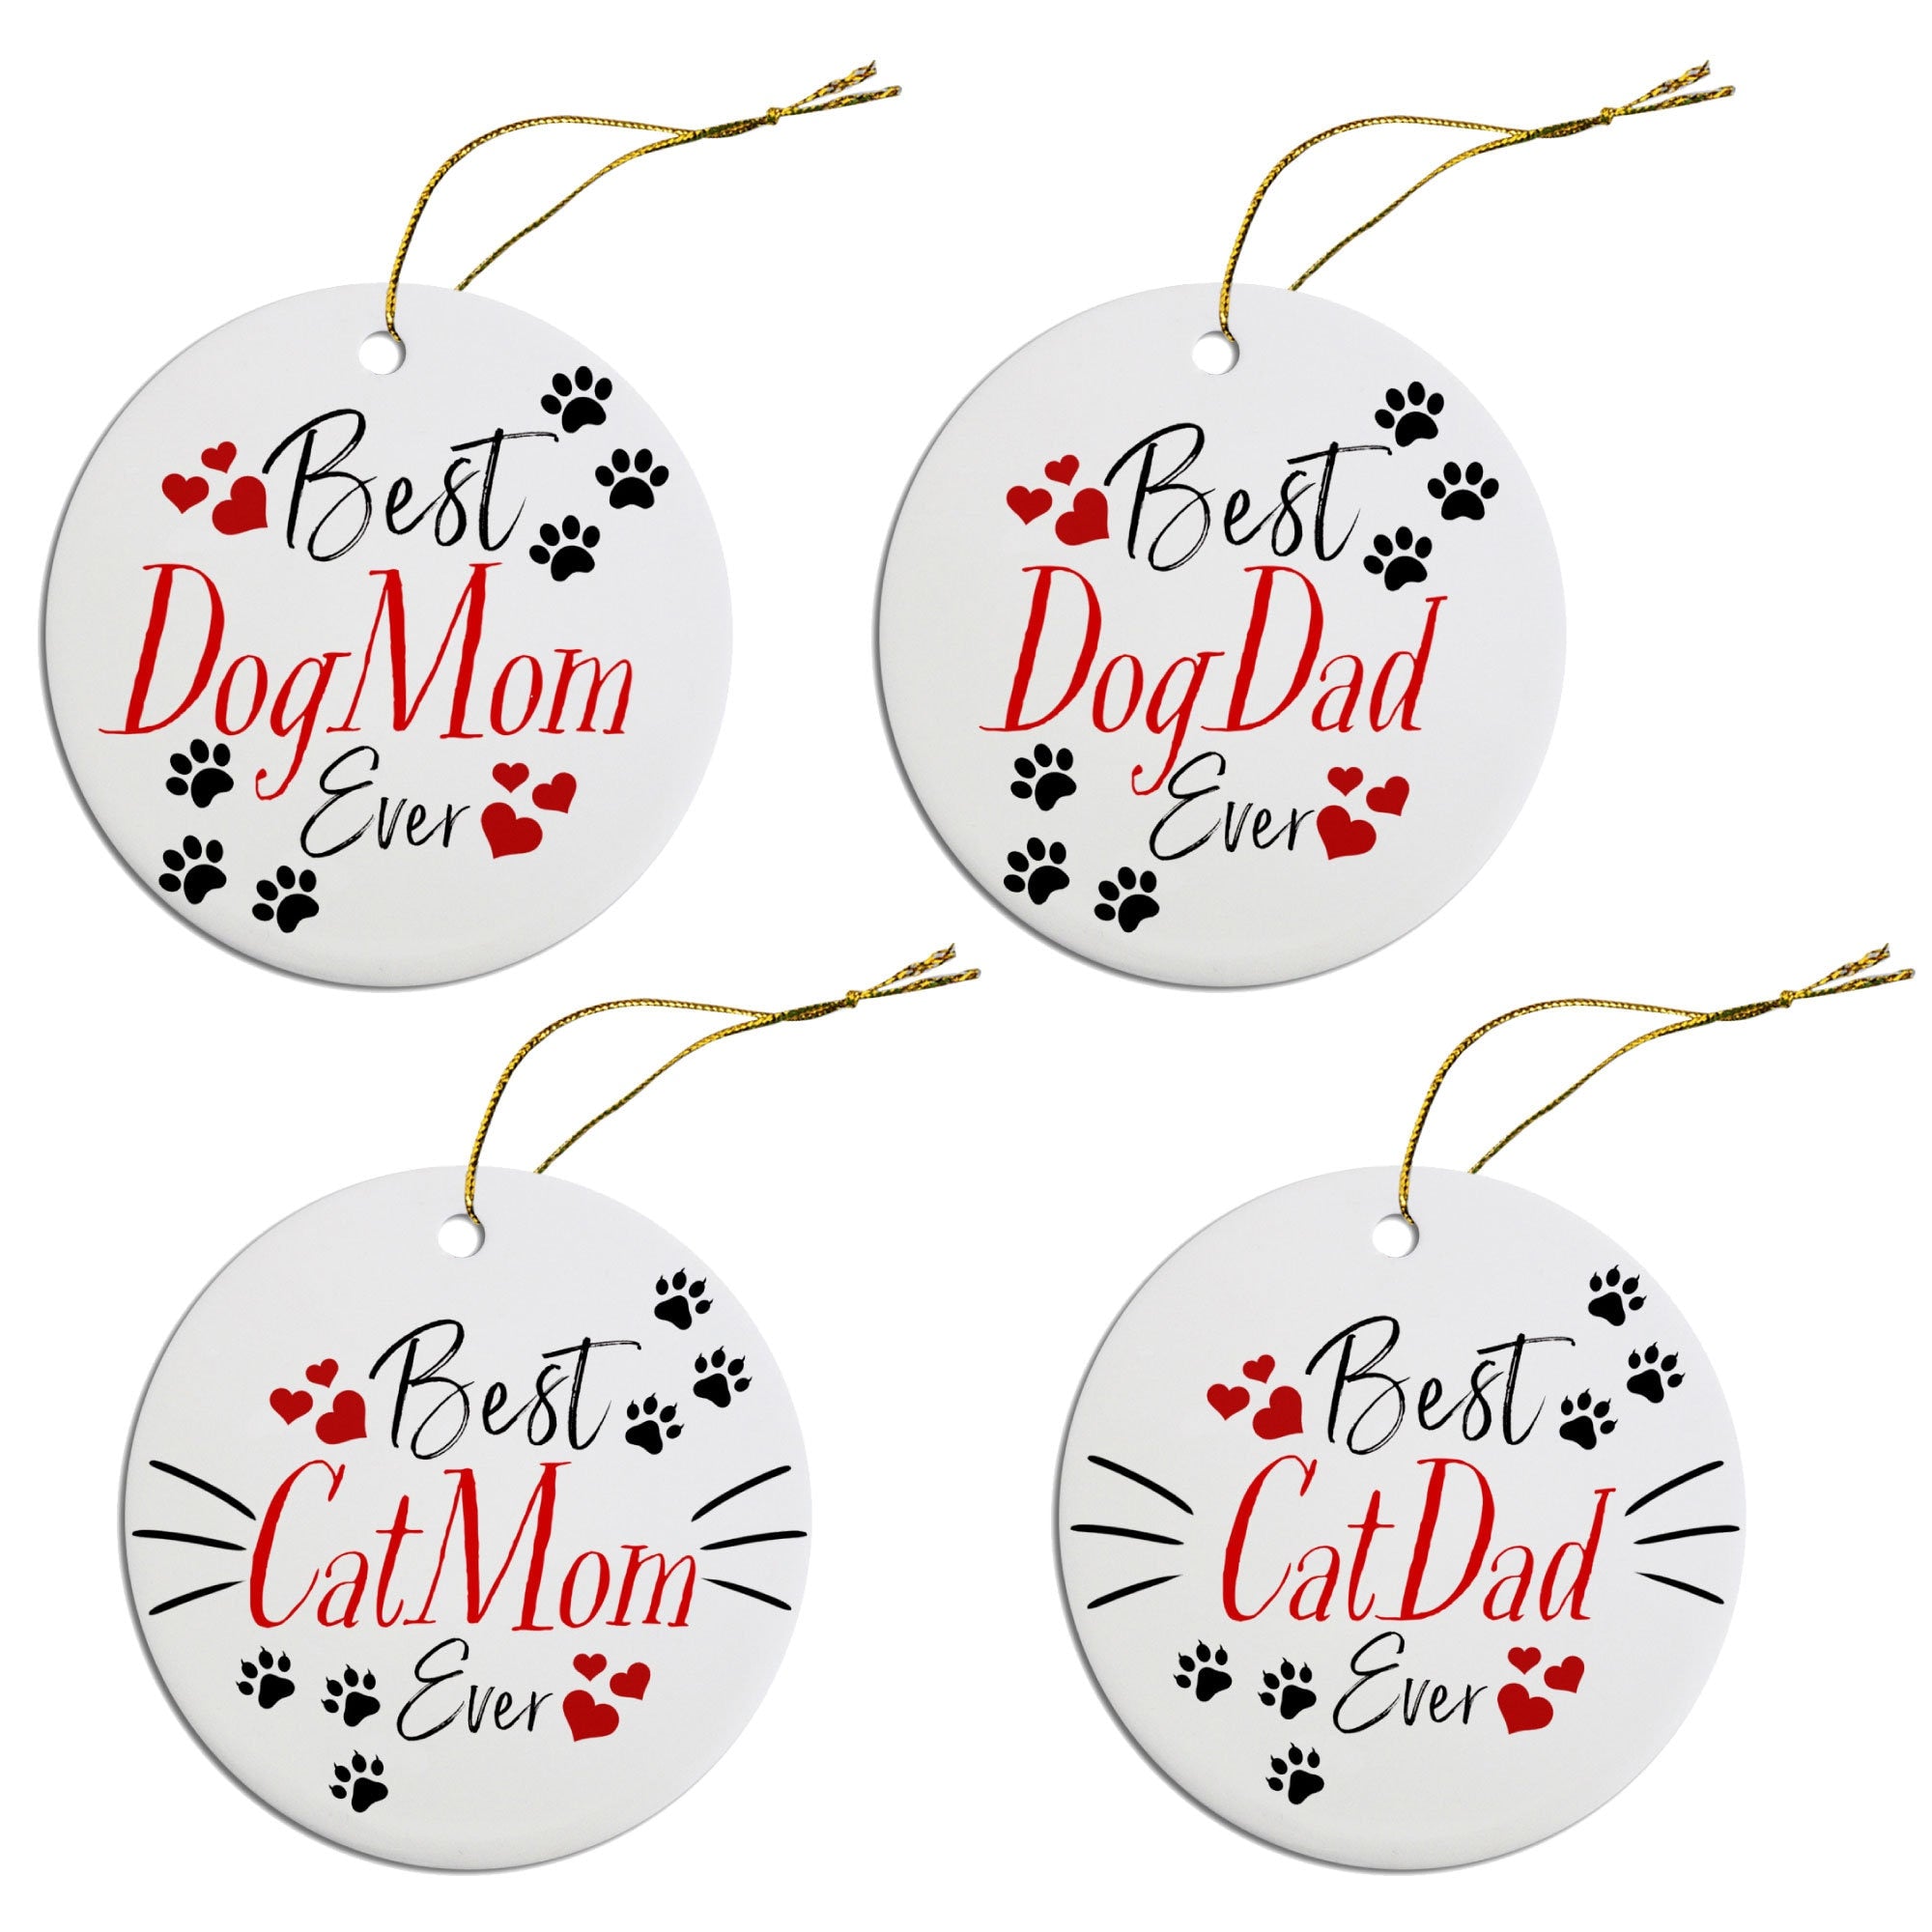 Holiday Fun Christmas Ornaments &quot;Best Dog Mom Ever, Best Cat Mom Ever, Best Dog Dad Ever, or Best Cat Dad Ever&quot;